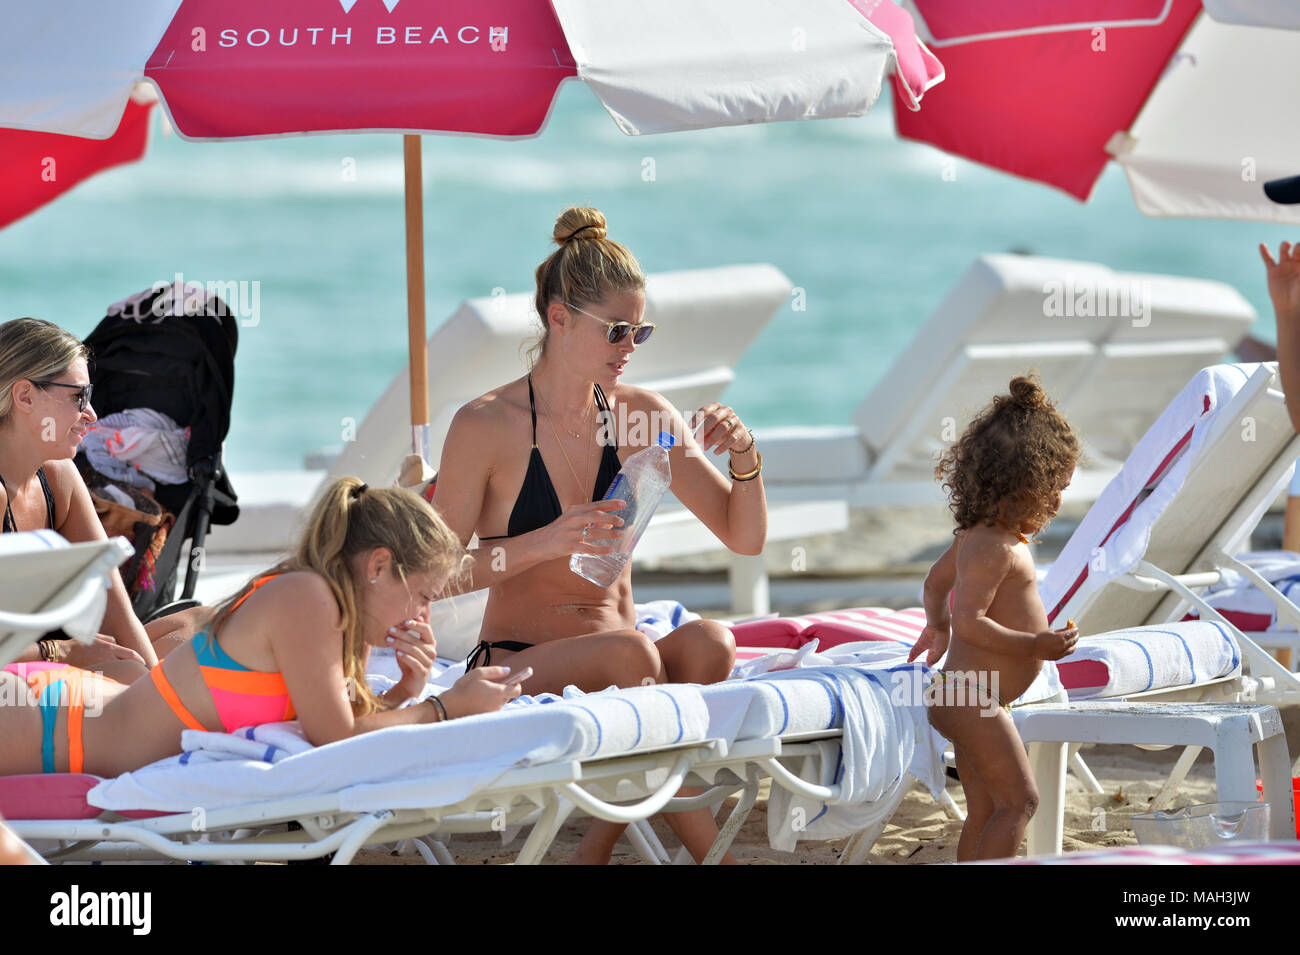 MIAMI, FL - JANUARY 03: Doutzen Kroes the former Victoria's Secret Angel  wearing a skimpy black triangle string bikini was joined by her adorable  children, son Phyllon, five, and daughter Myllena, two